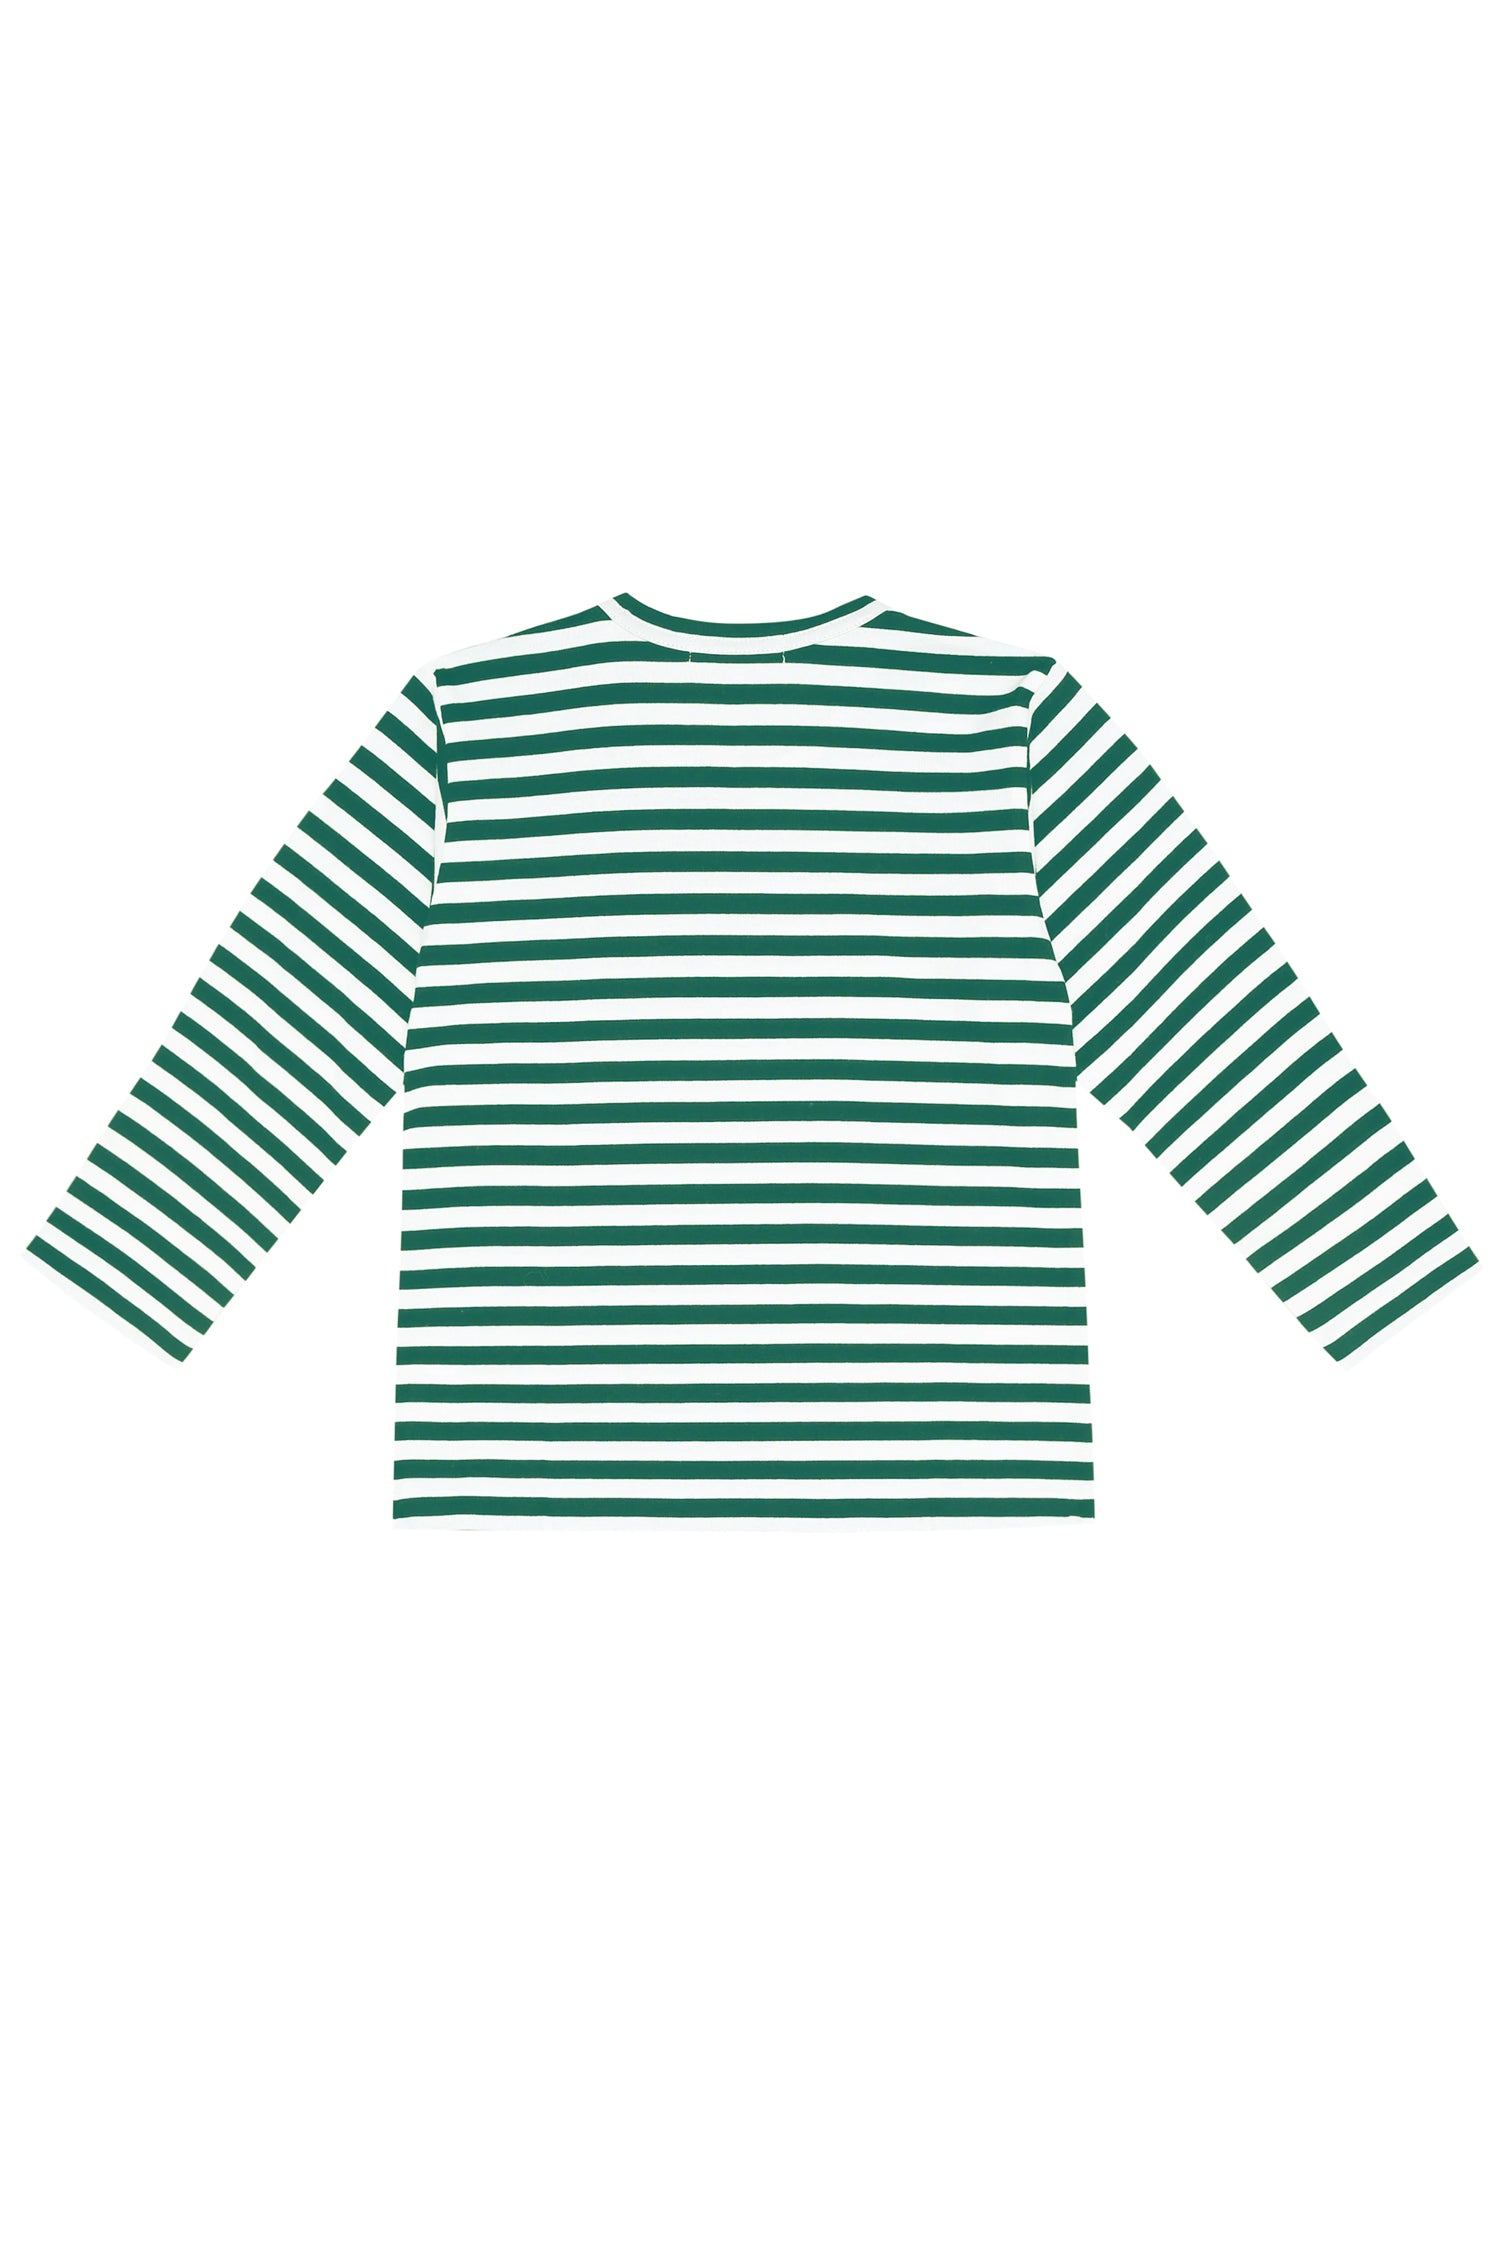 PLAY KIDS STRIPED T-SHIRT IN GREEN, FW22